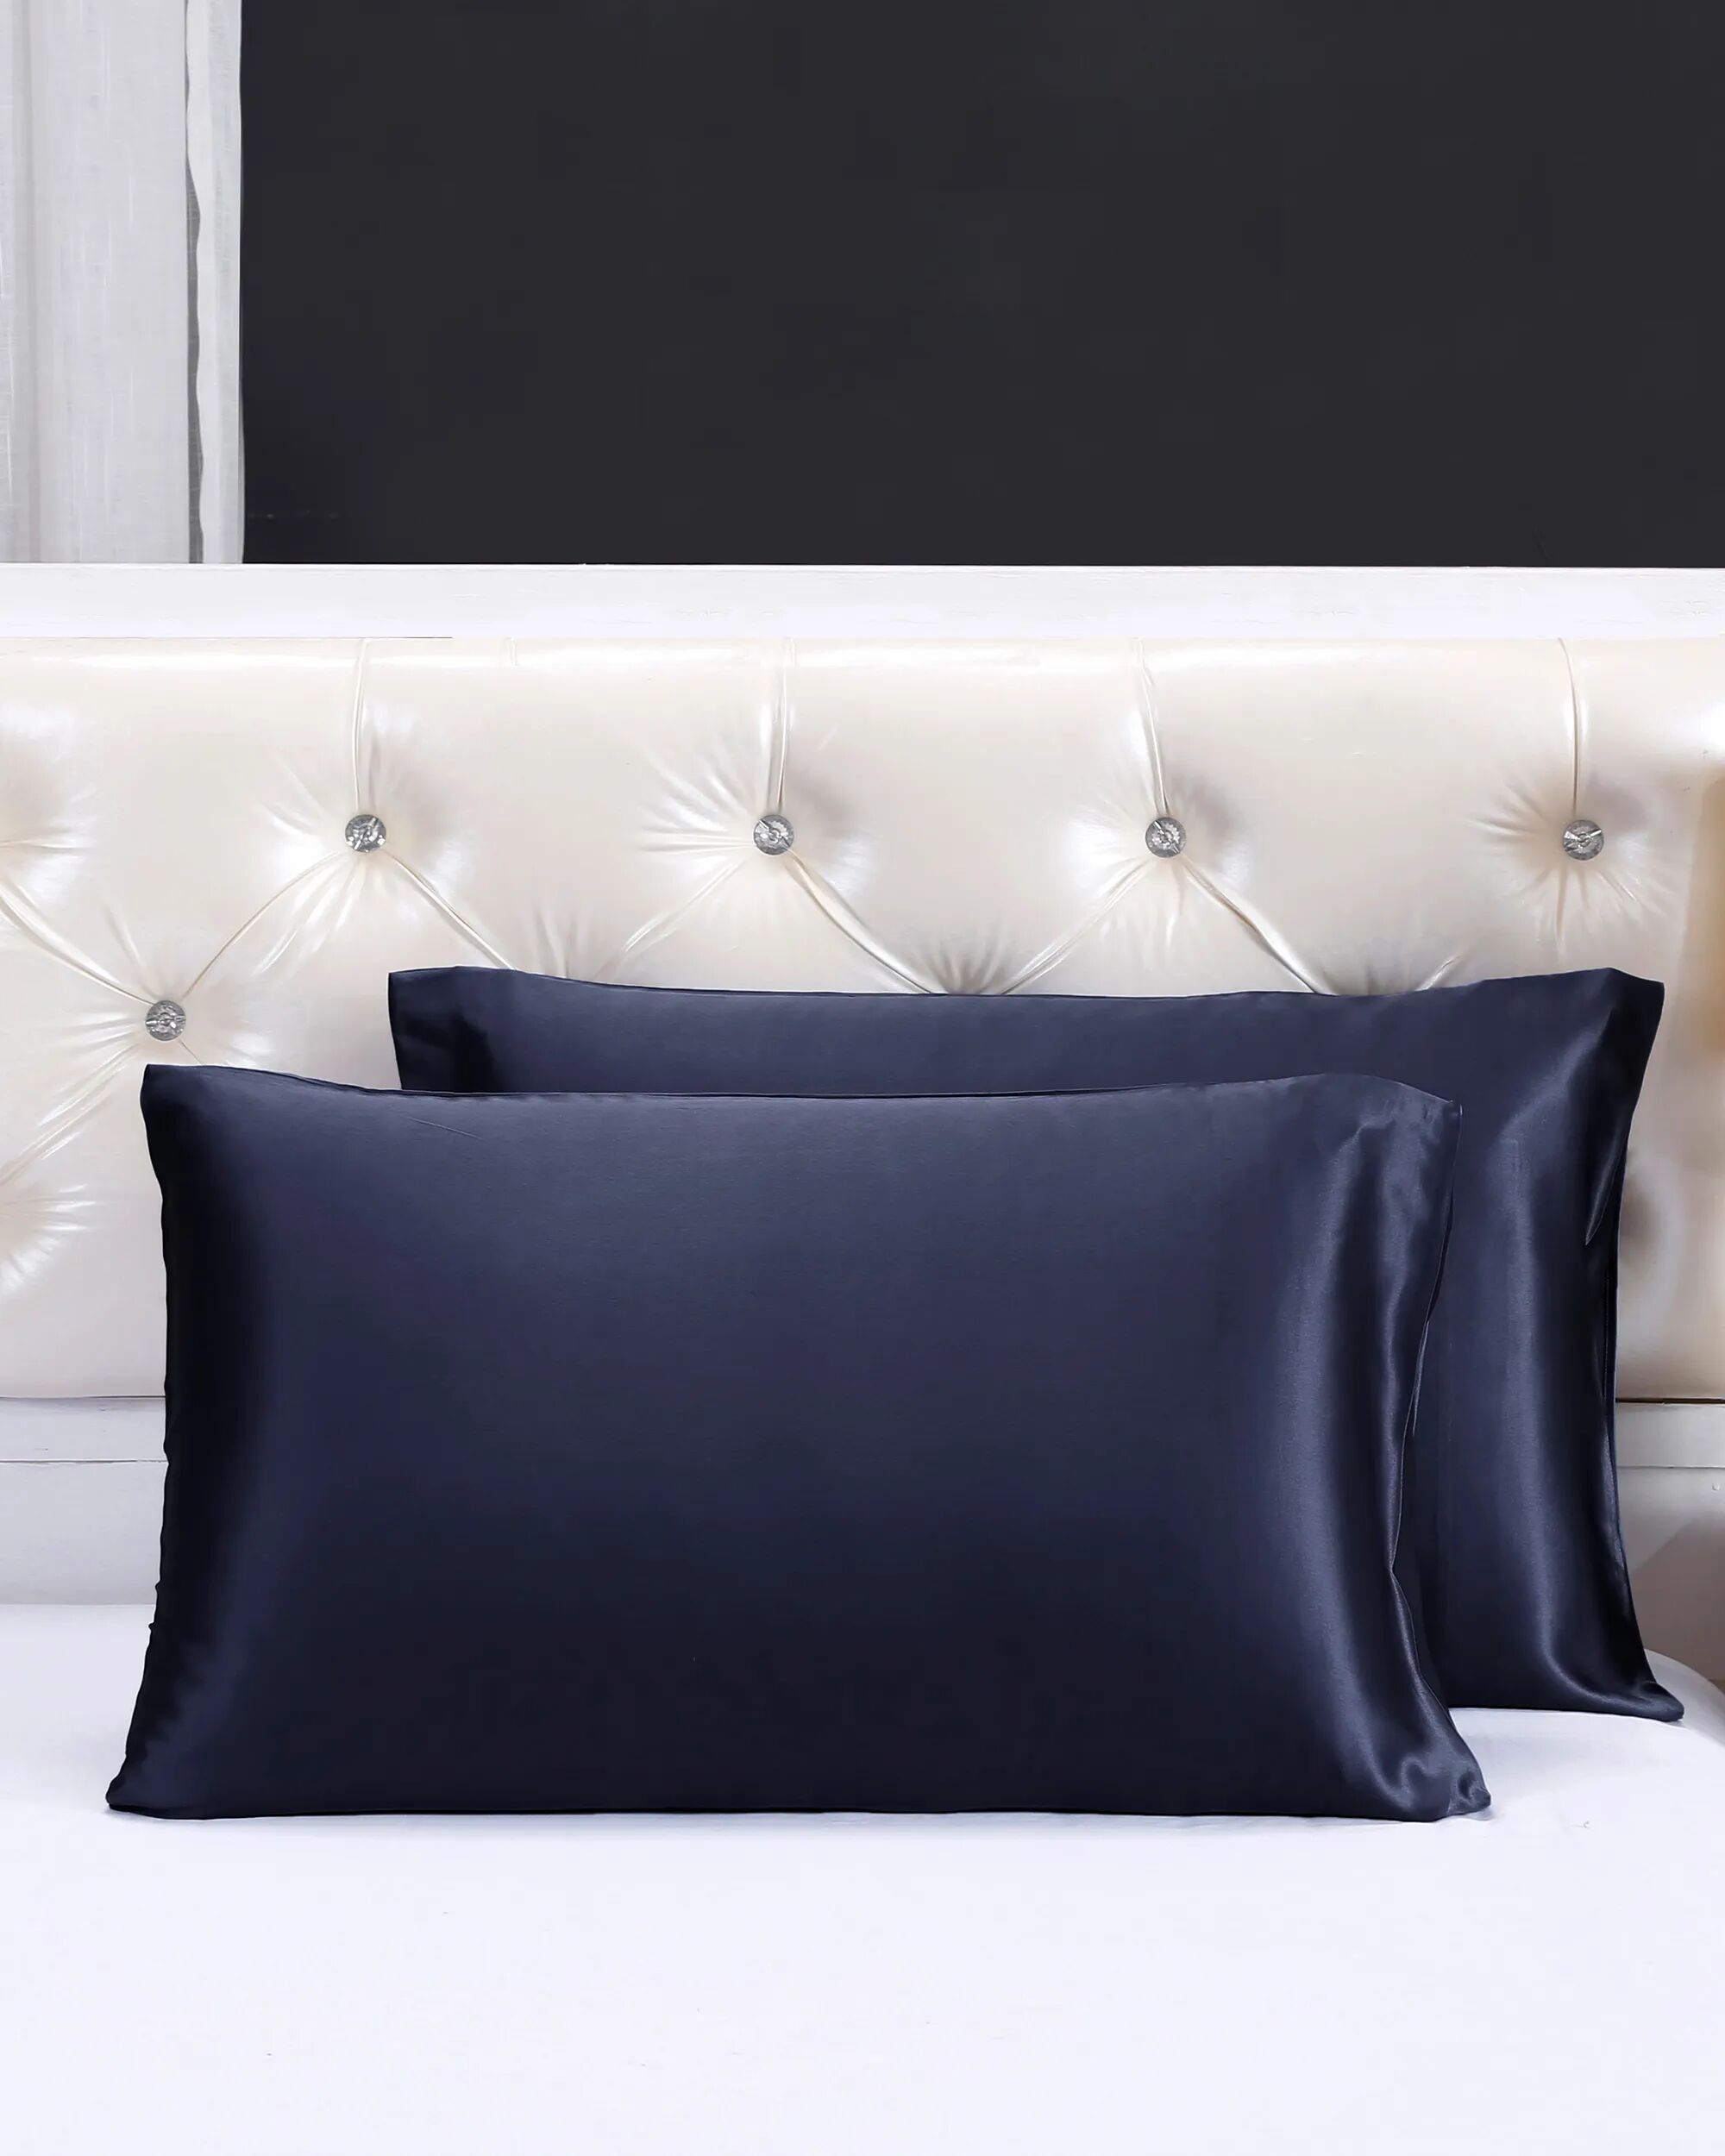 LILYSILK Silk Pillowcase Near Me Adult Navy Blue US 19 Momme Charmeuse Silk Glossy Plain-Color Light And Soft King